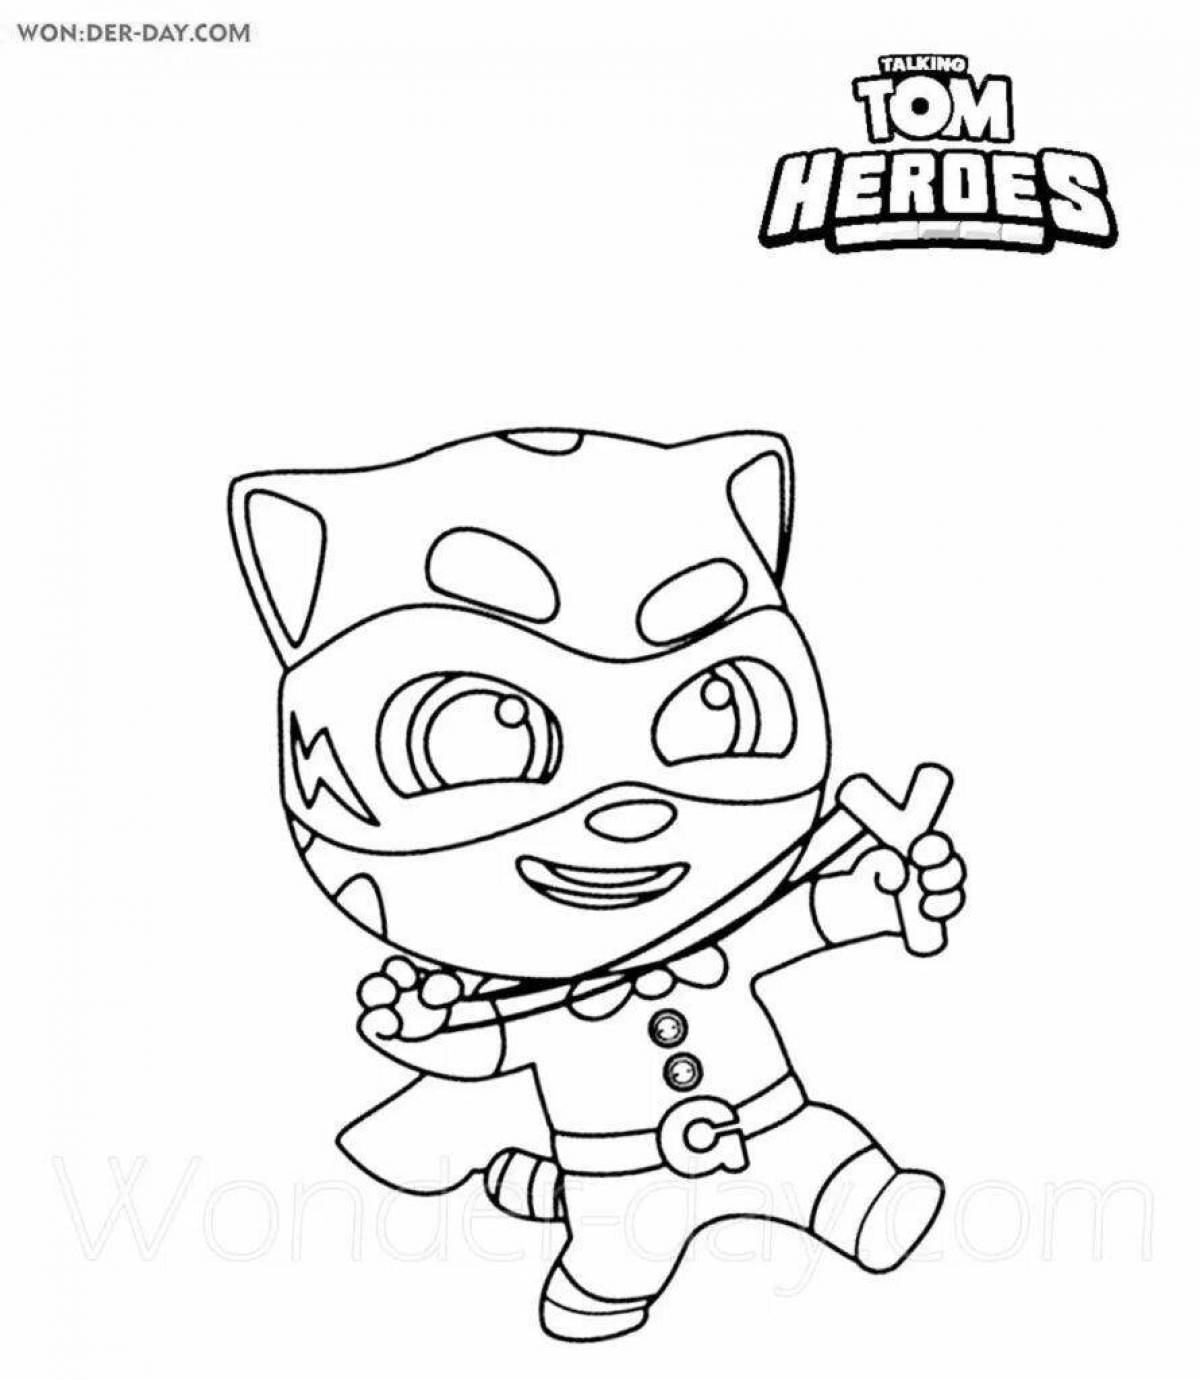 Tom chase dynamic coloring page